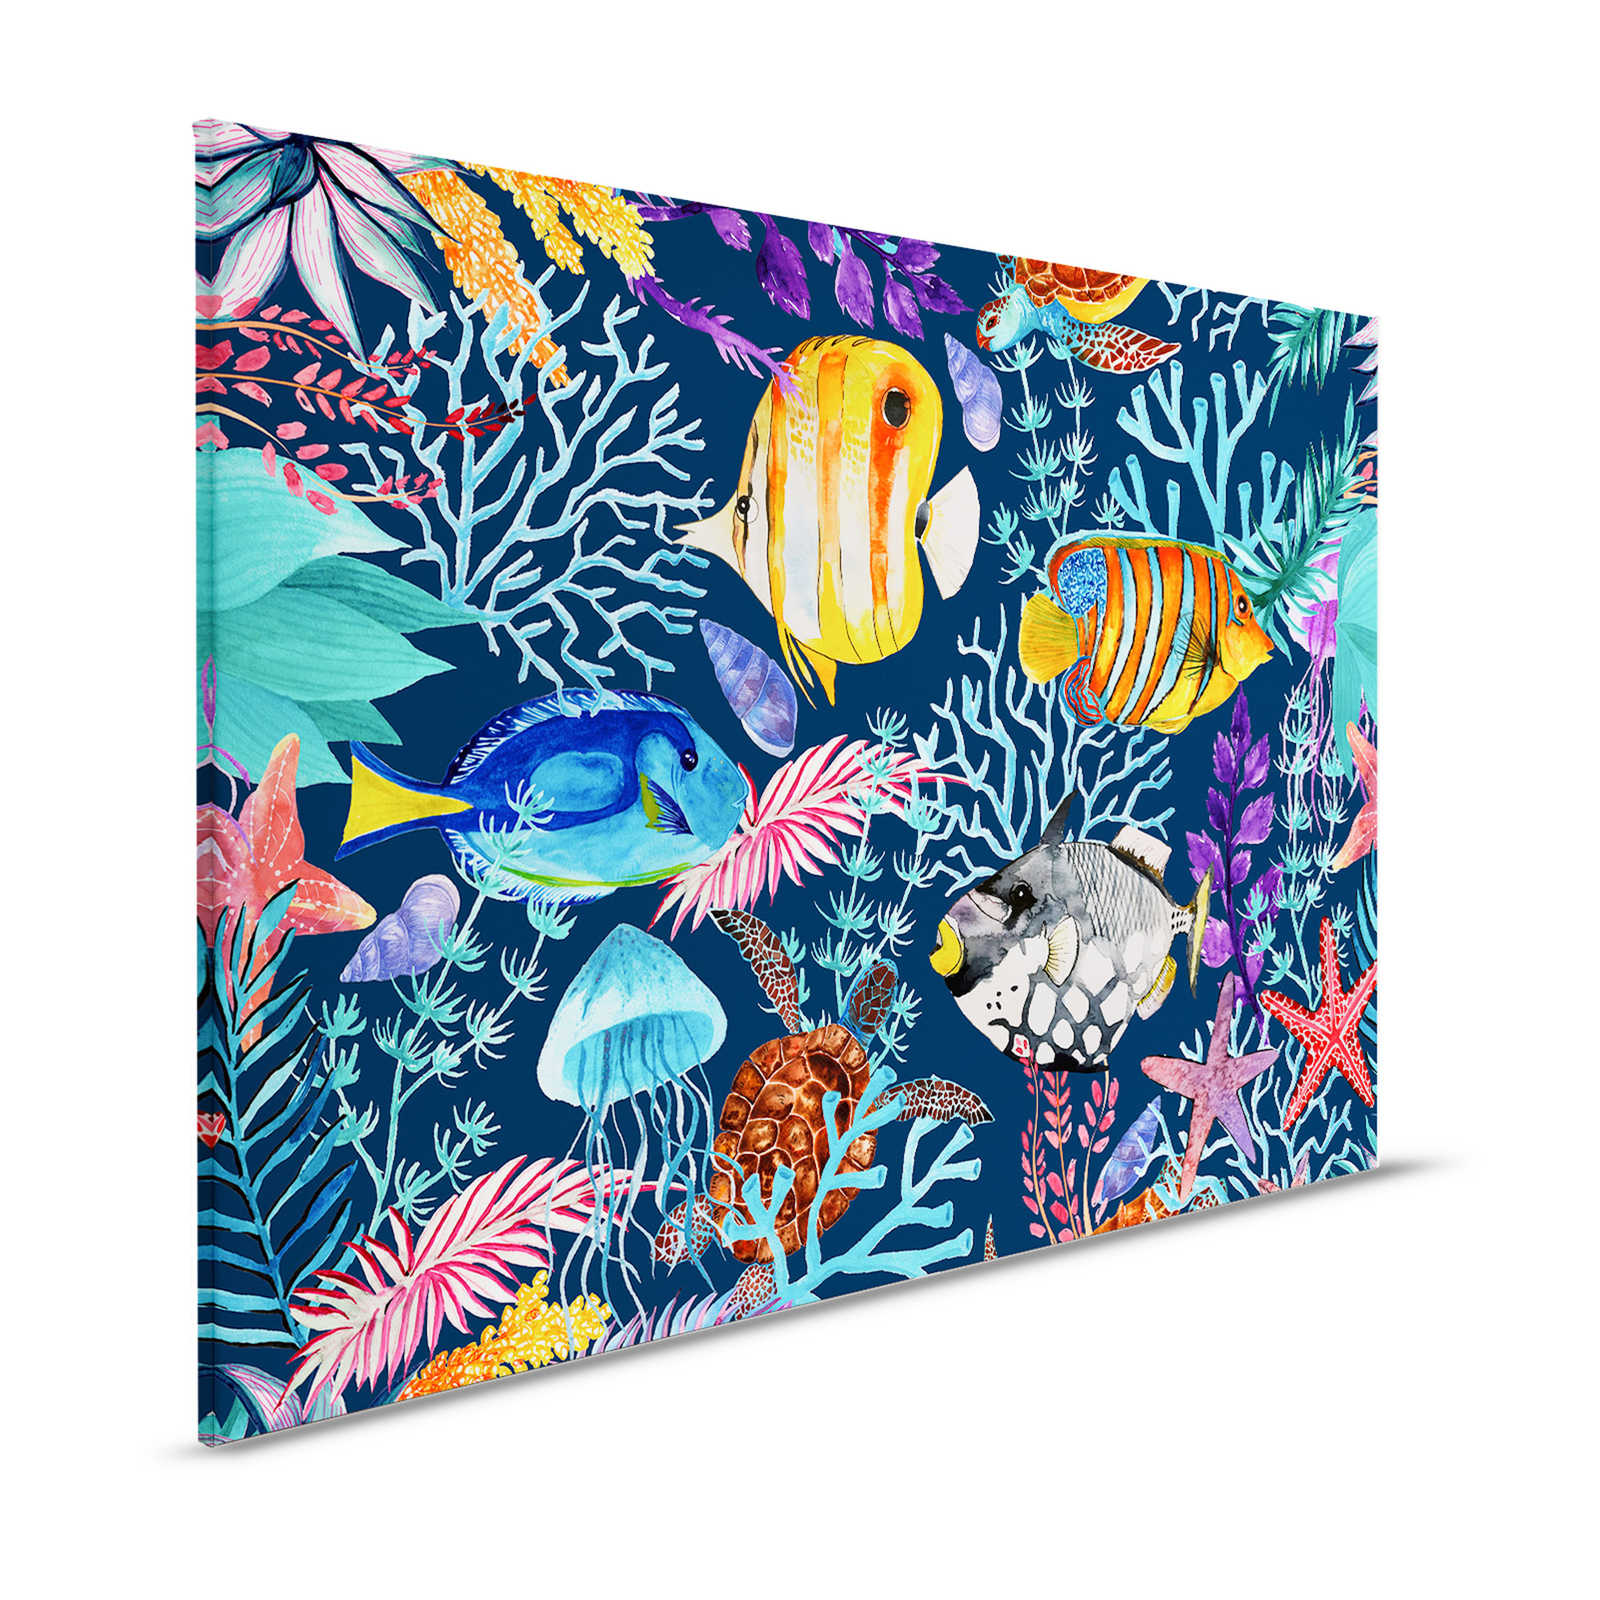 Underwater Canvas Painting with Colourful Fish & Starfish - 1.20 m x 0.80 m
